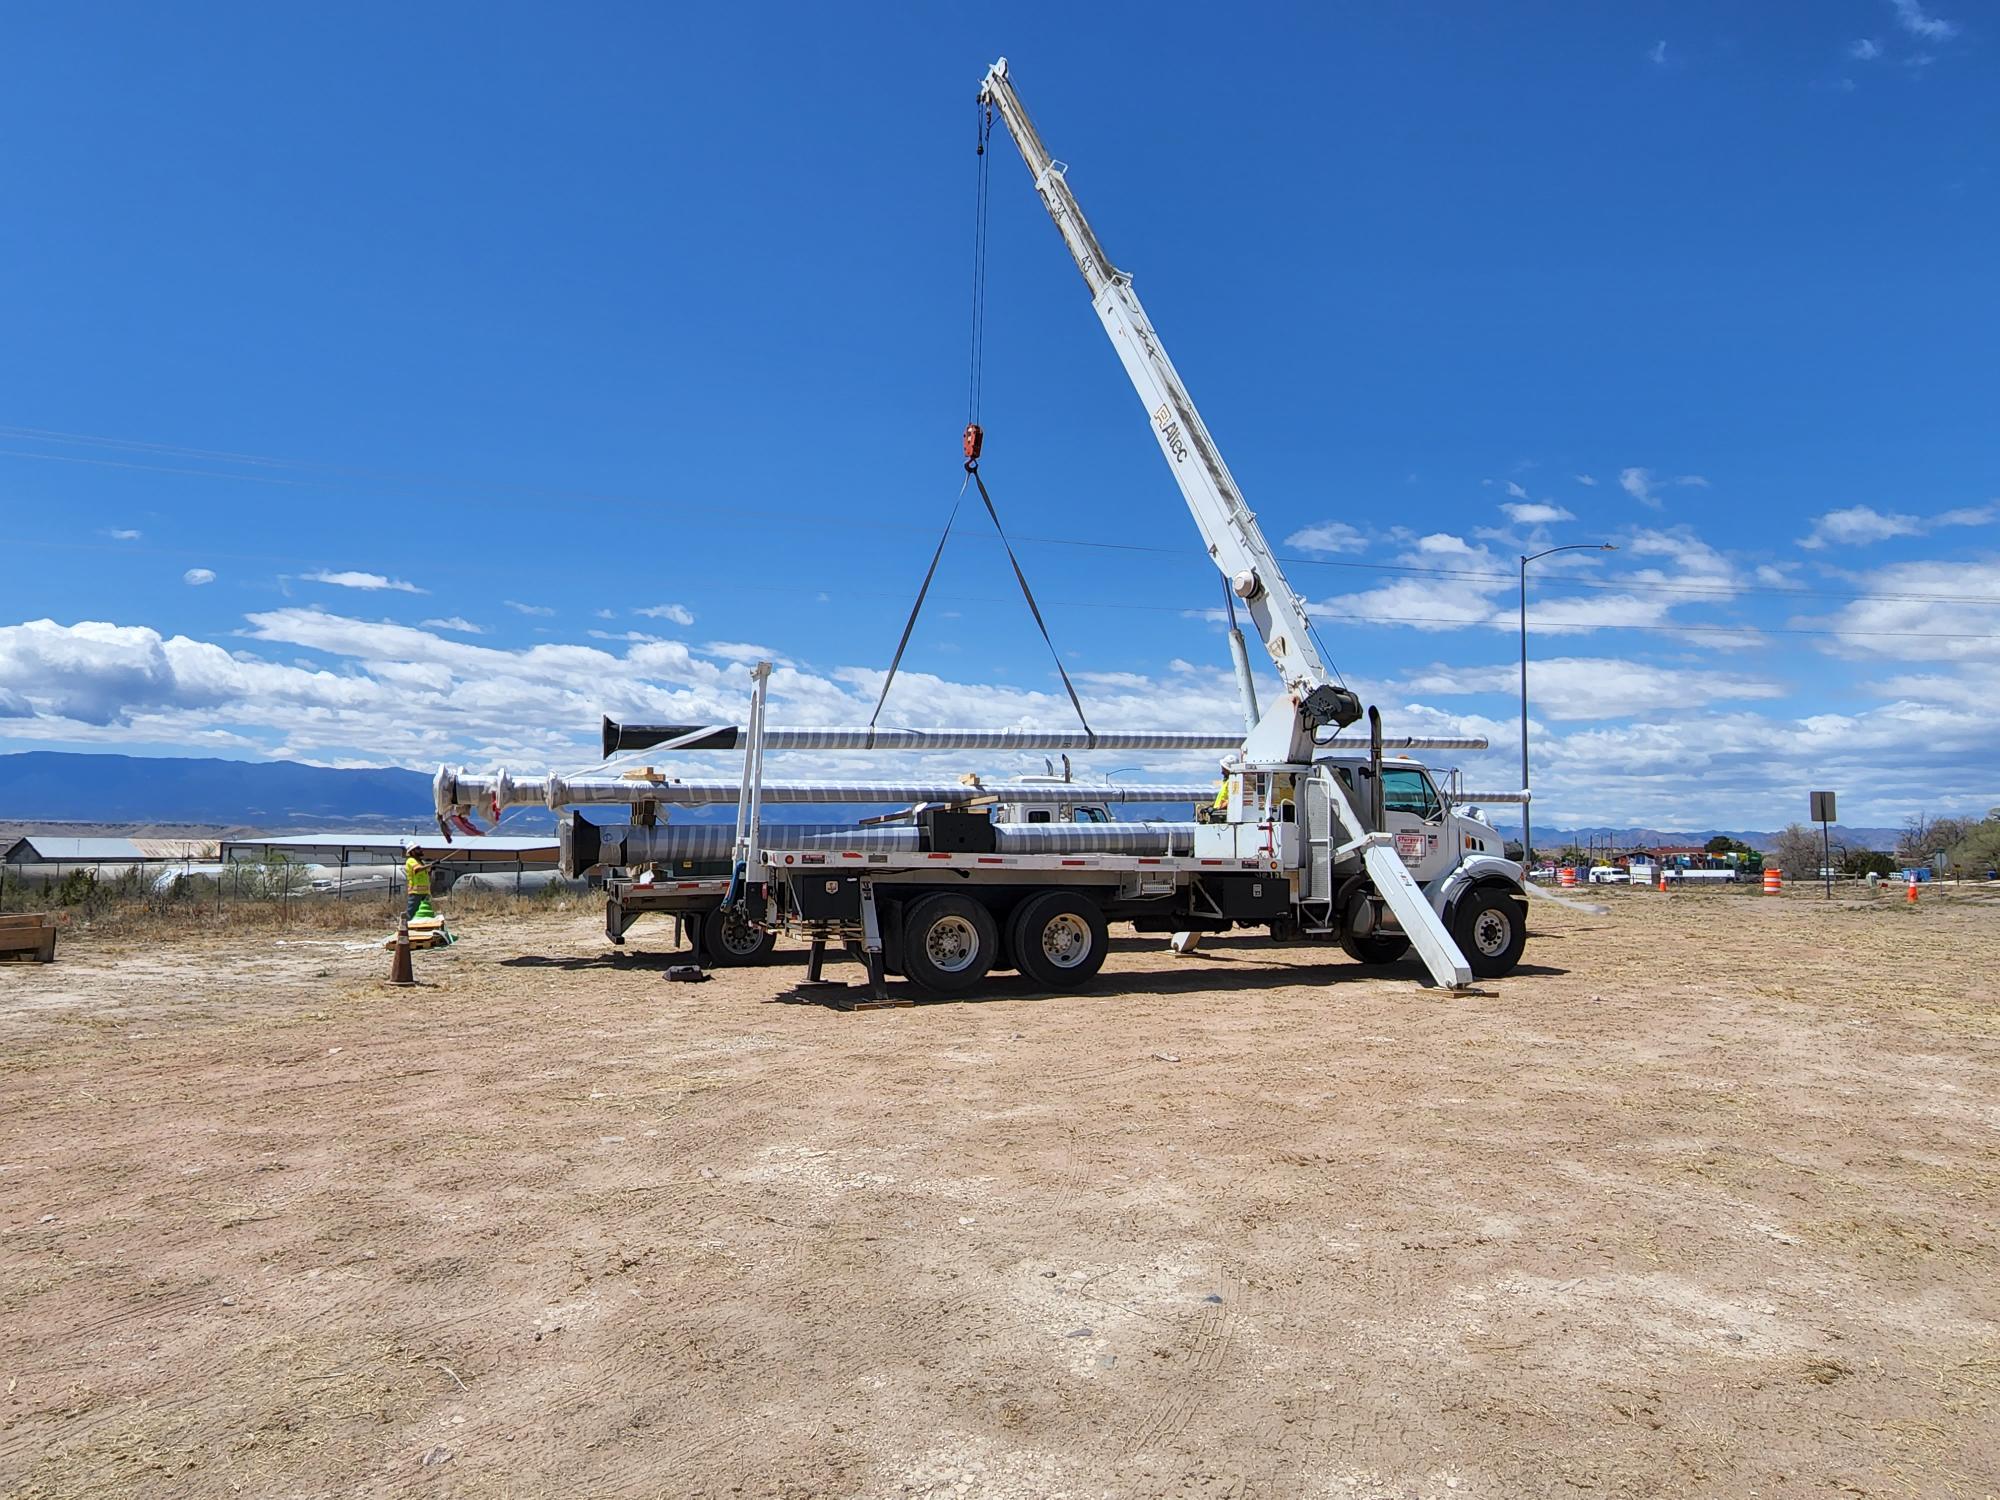 truck delivering new signal pole.jpg detail image